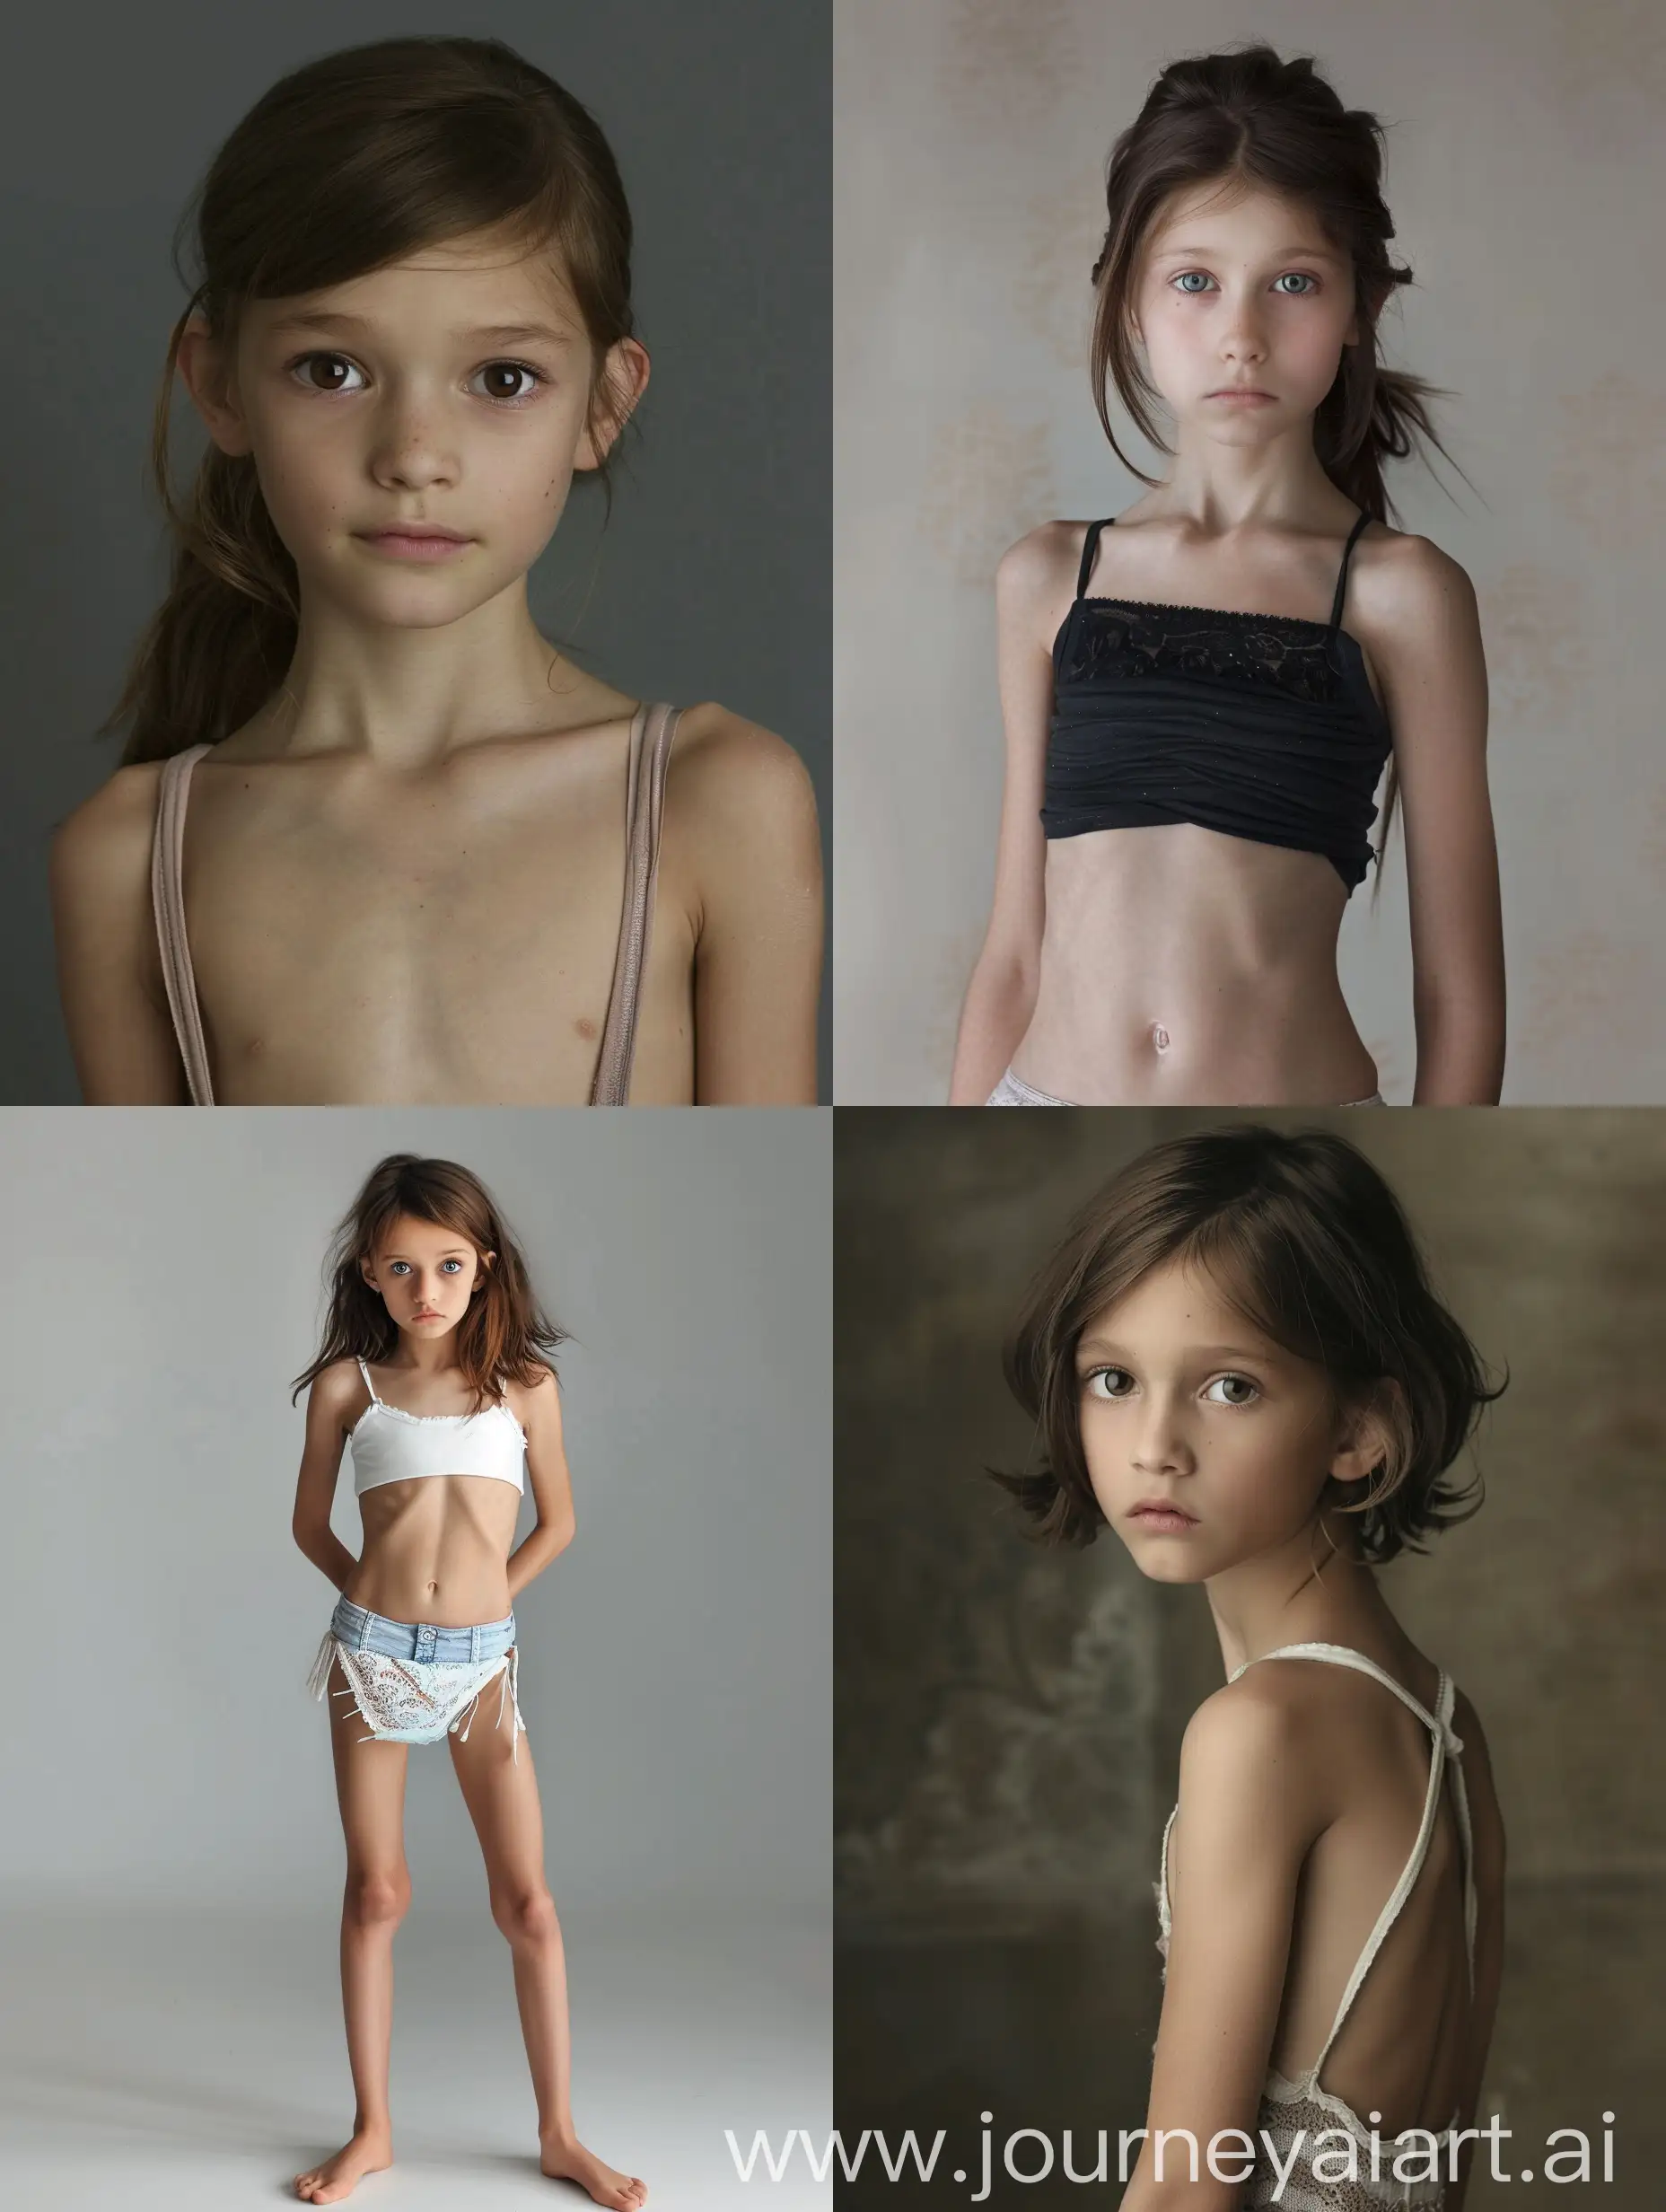 Captivating-Full-HD-Portrait-Photography-of-a-Slender-12YearOld-Girl-with-Brown-Hair